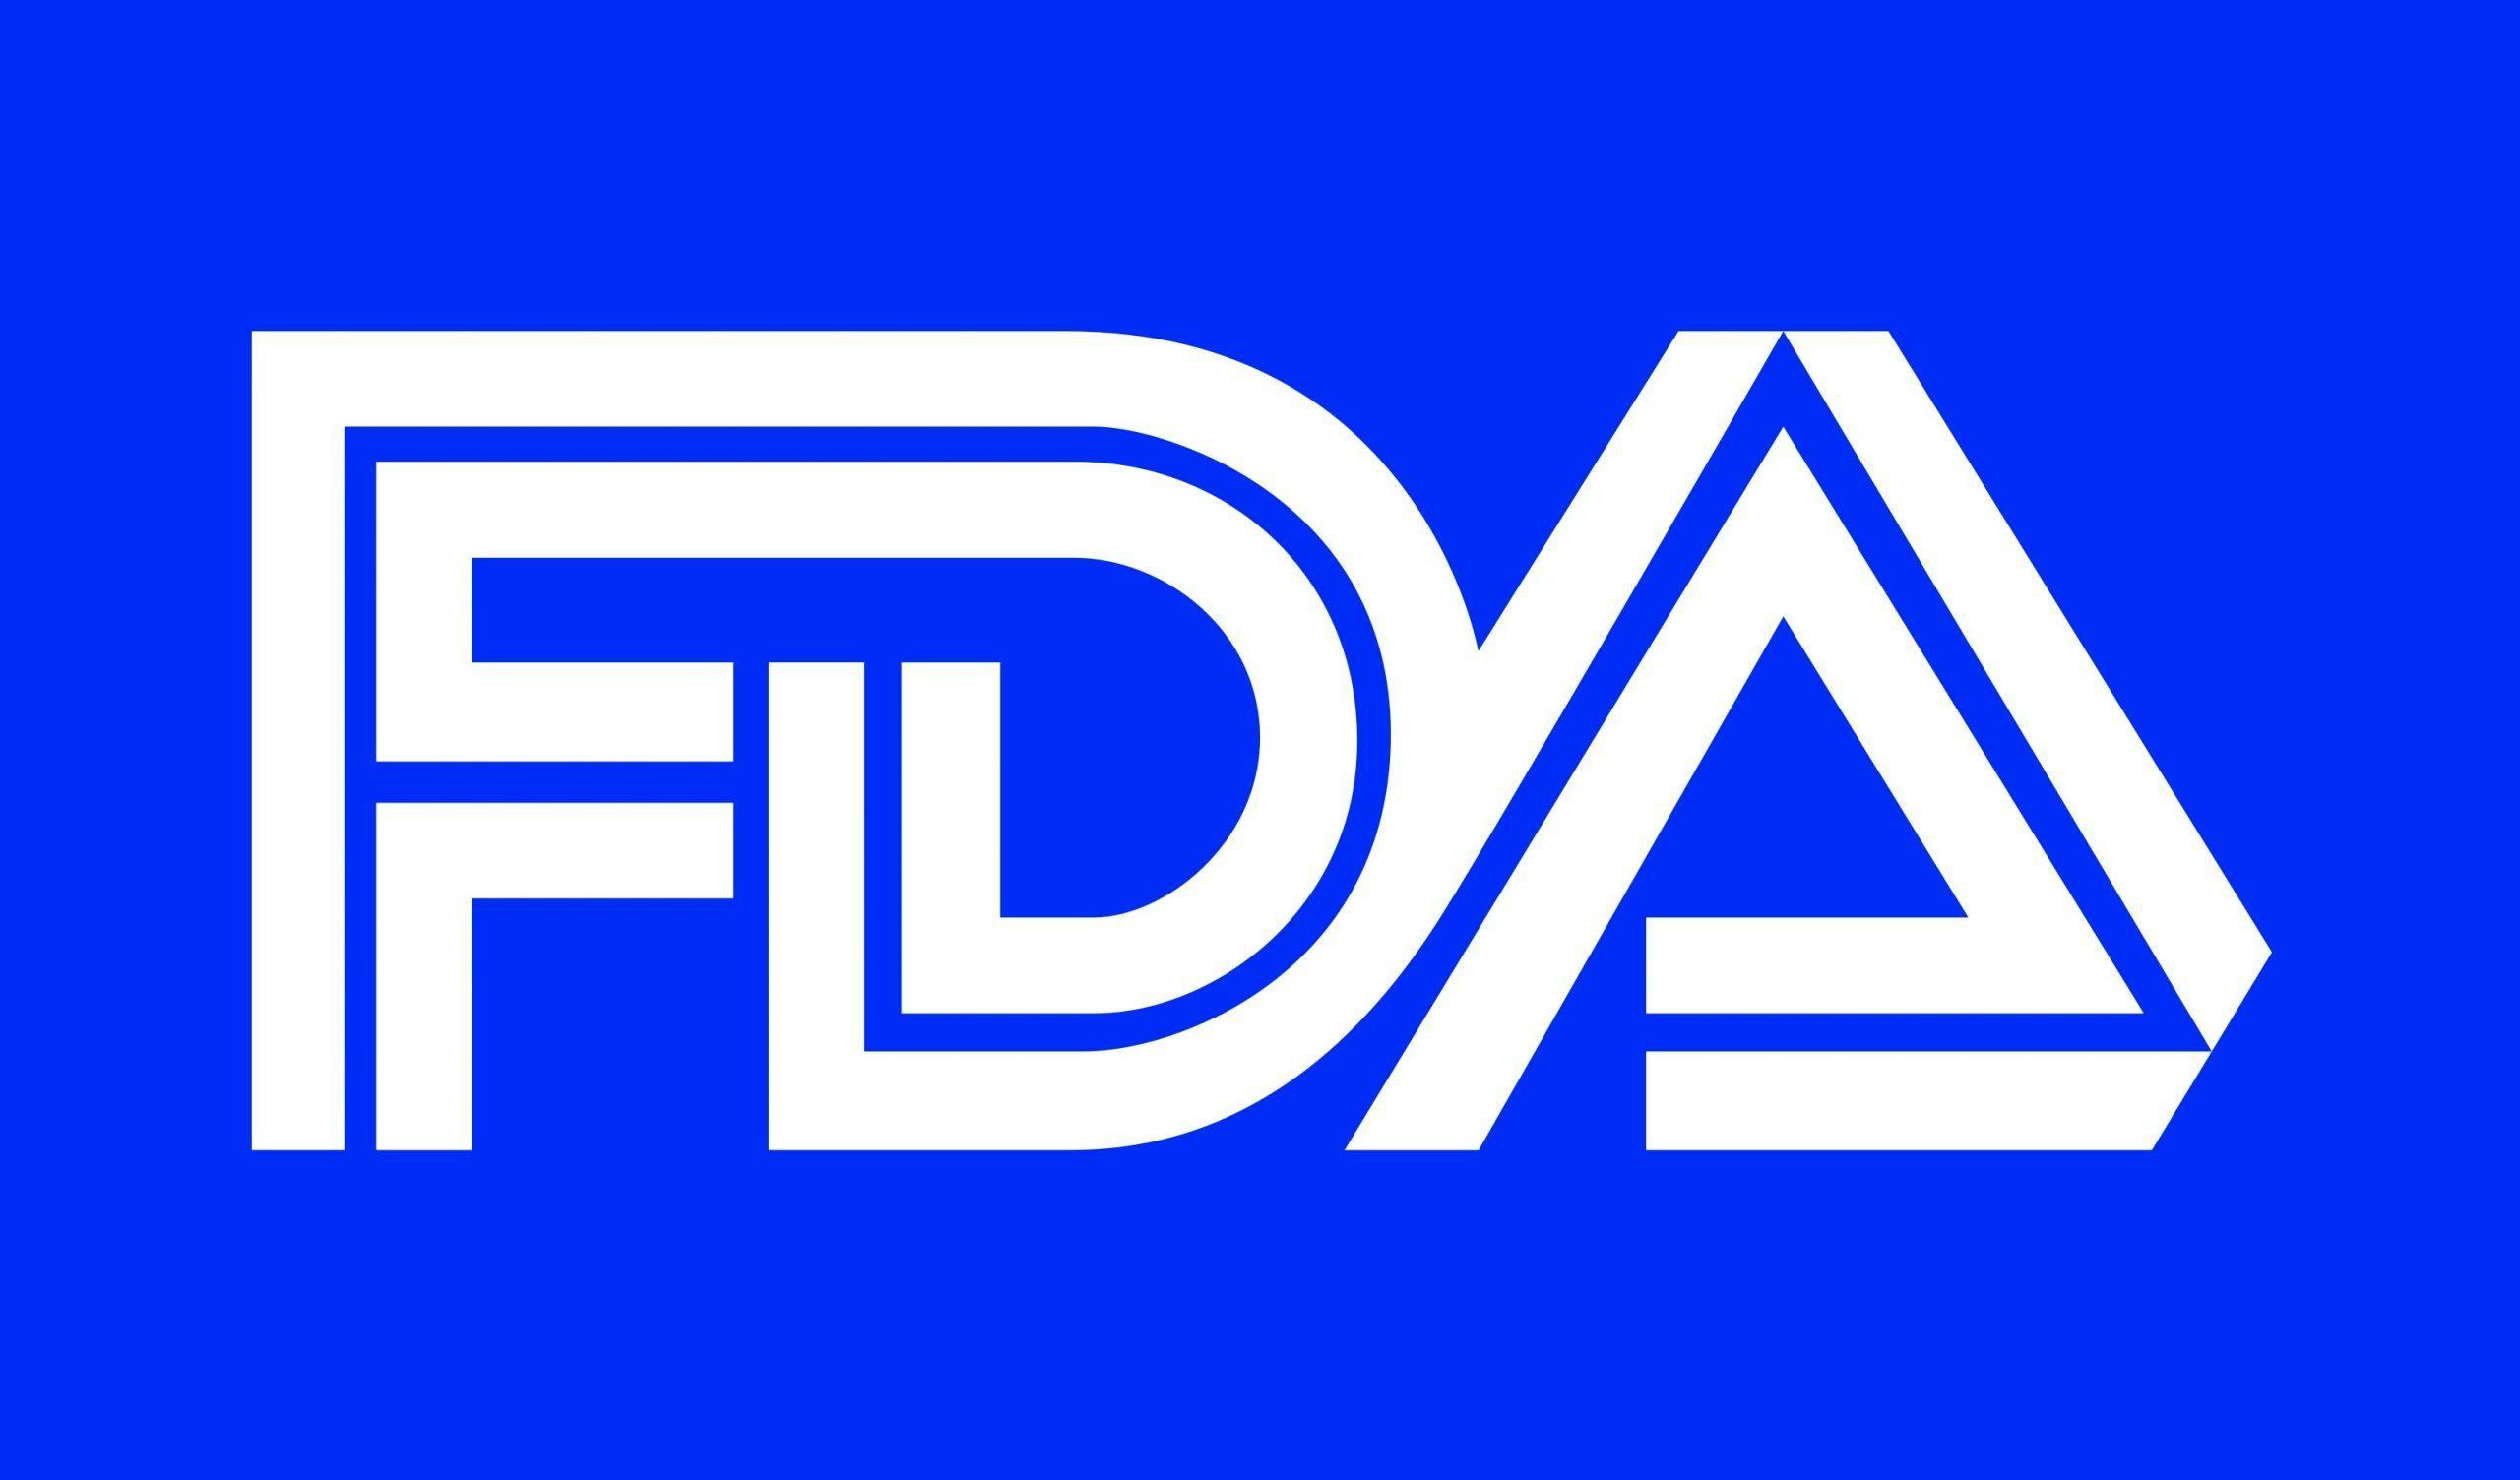 FDA Updates for Week of April of 11, 2022